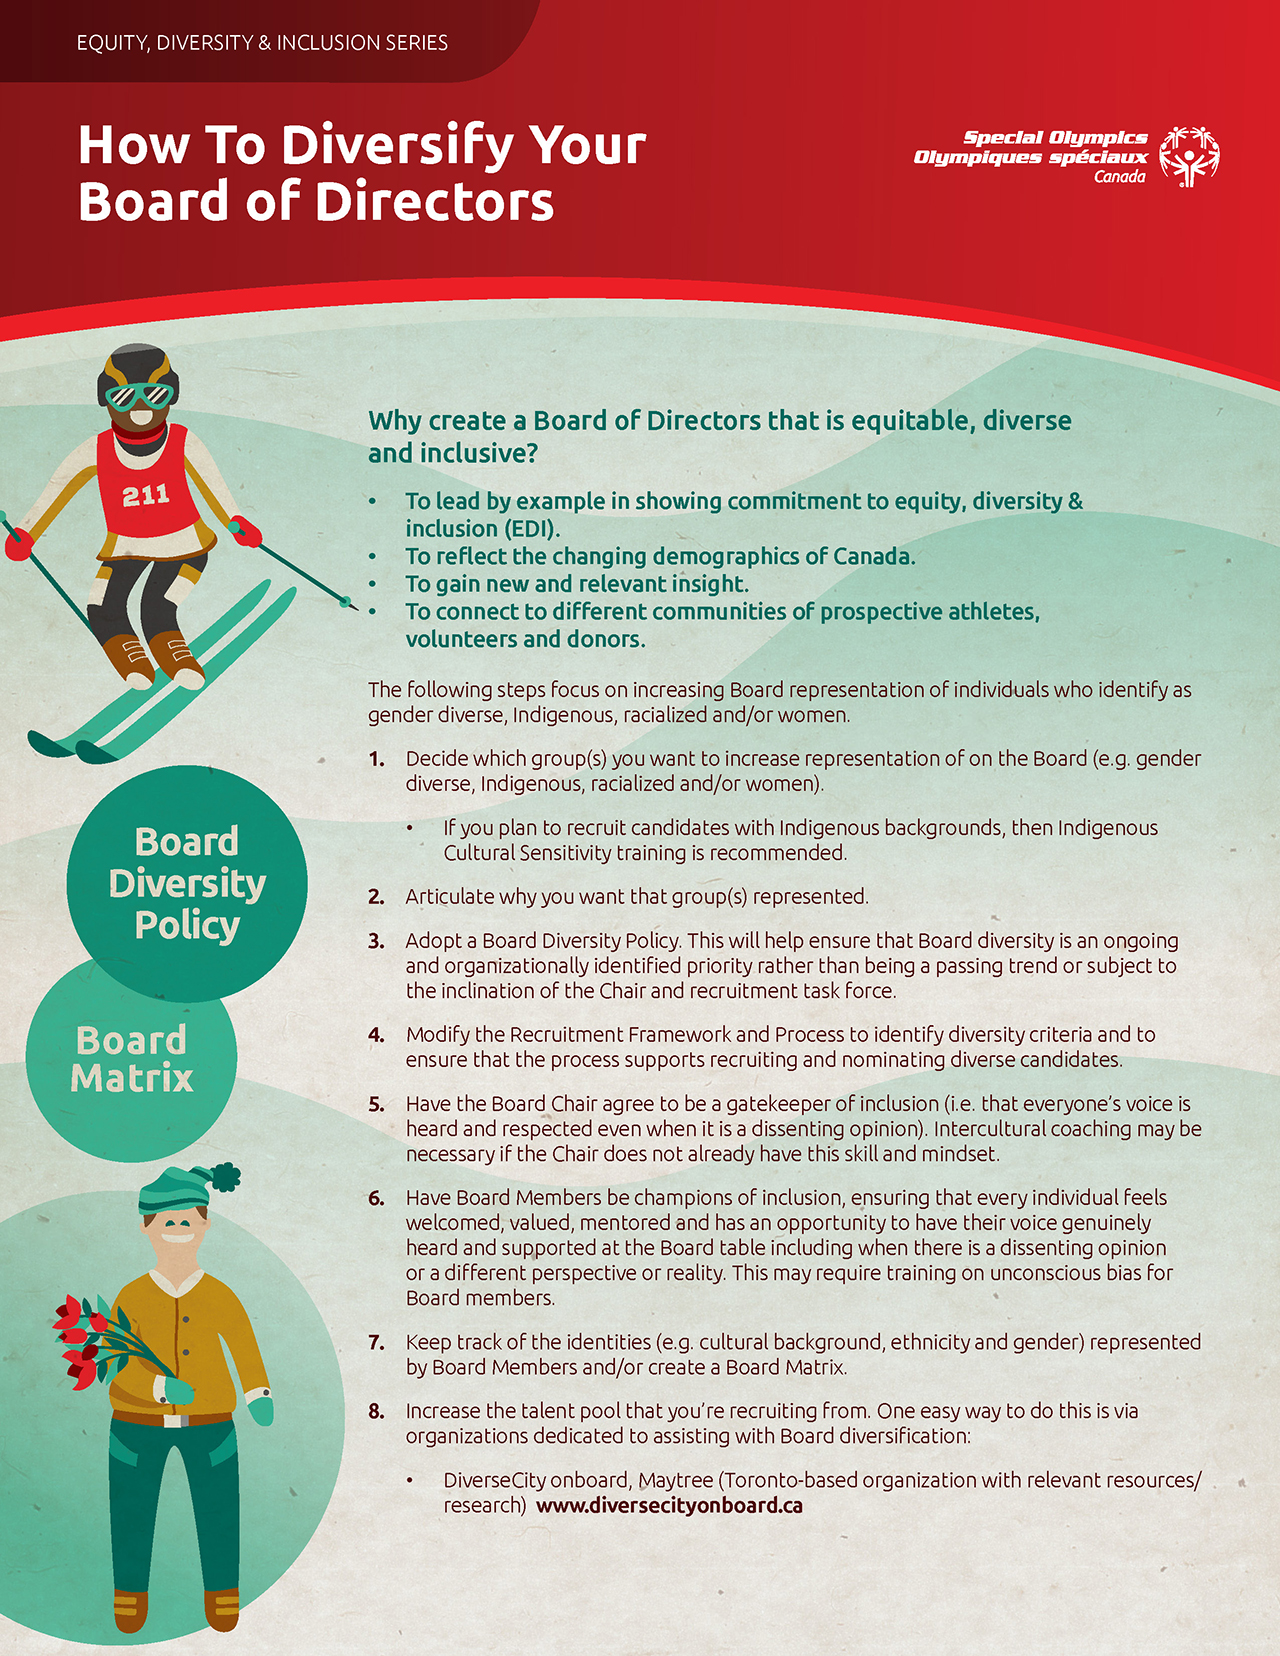 How to Diversify Your Board of Directors